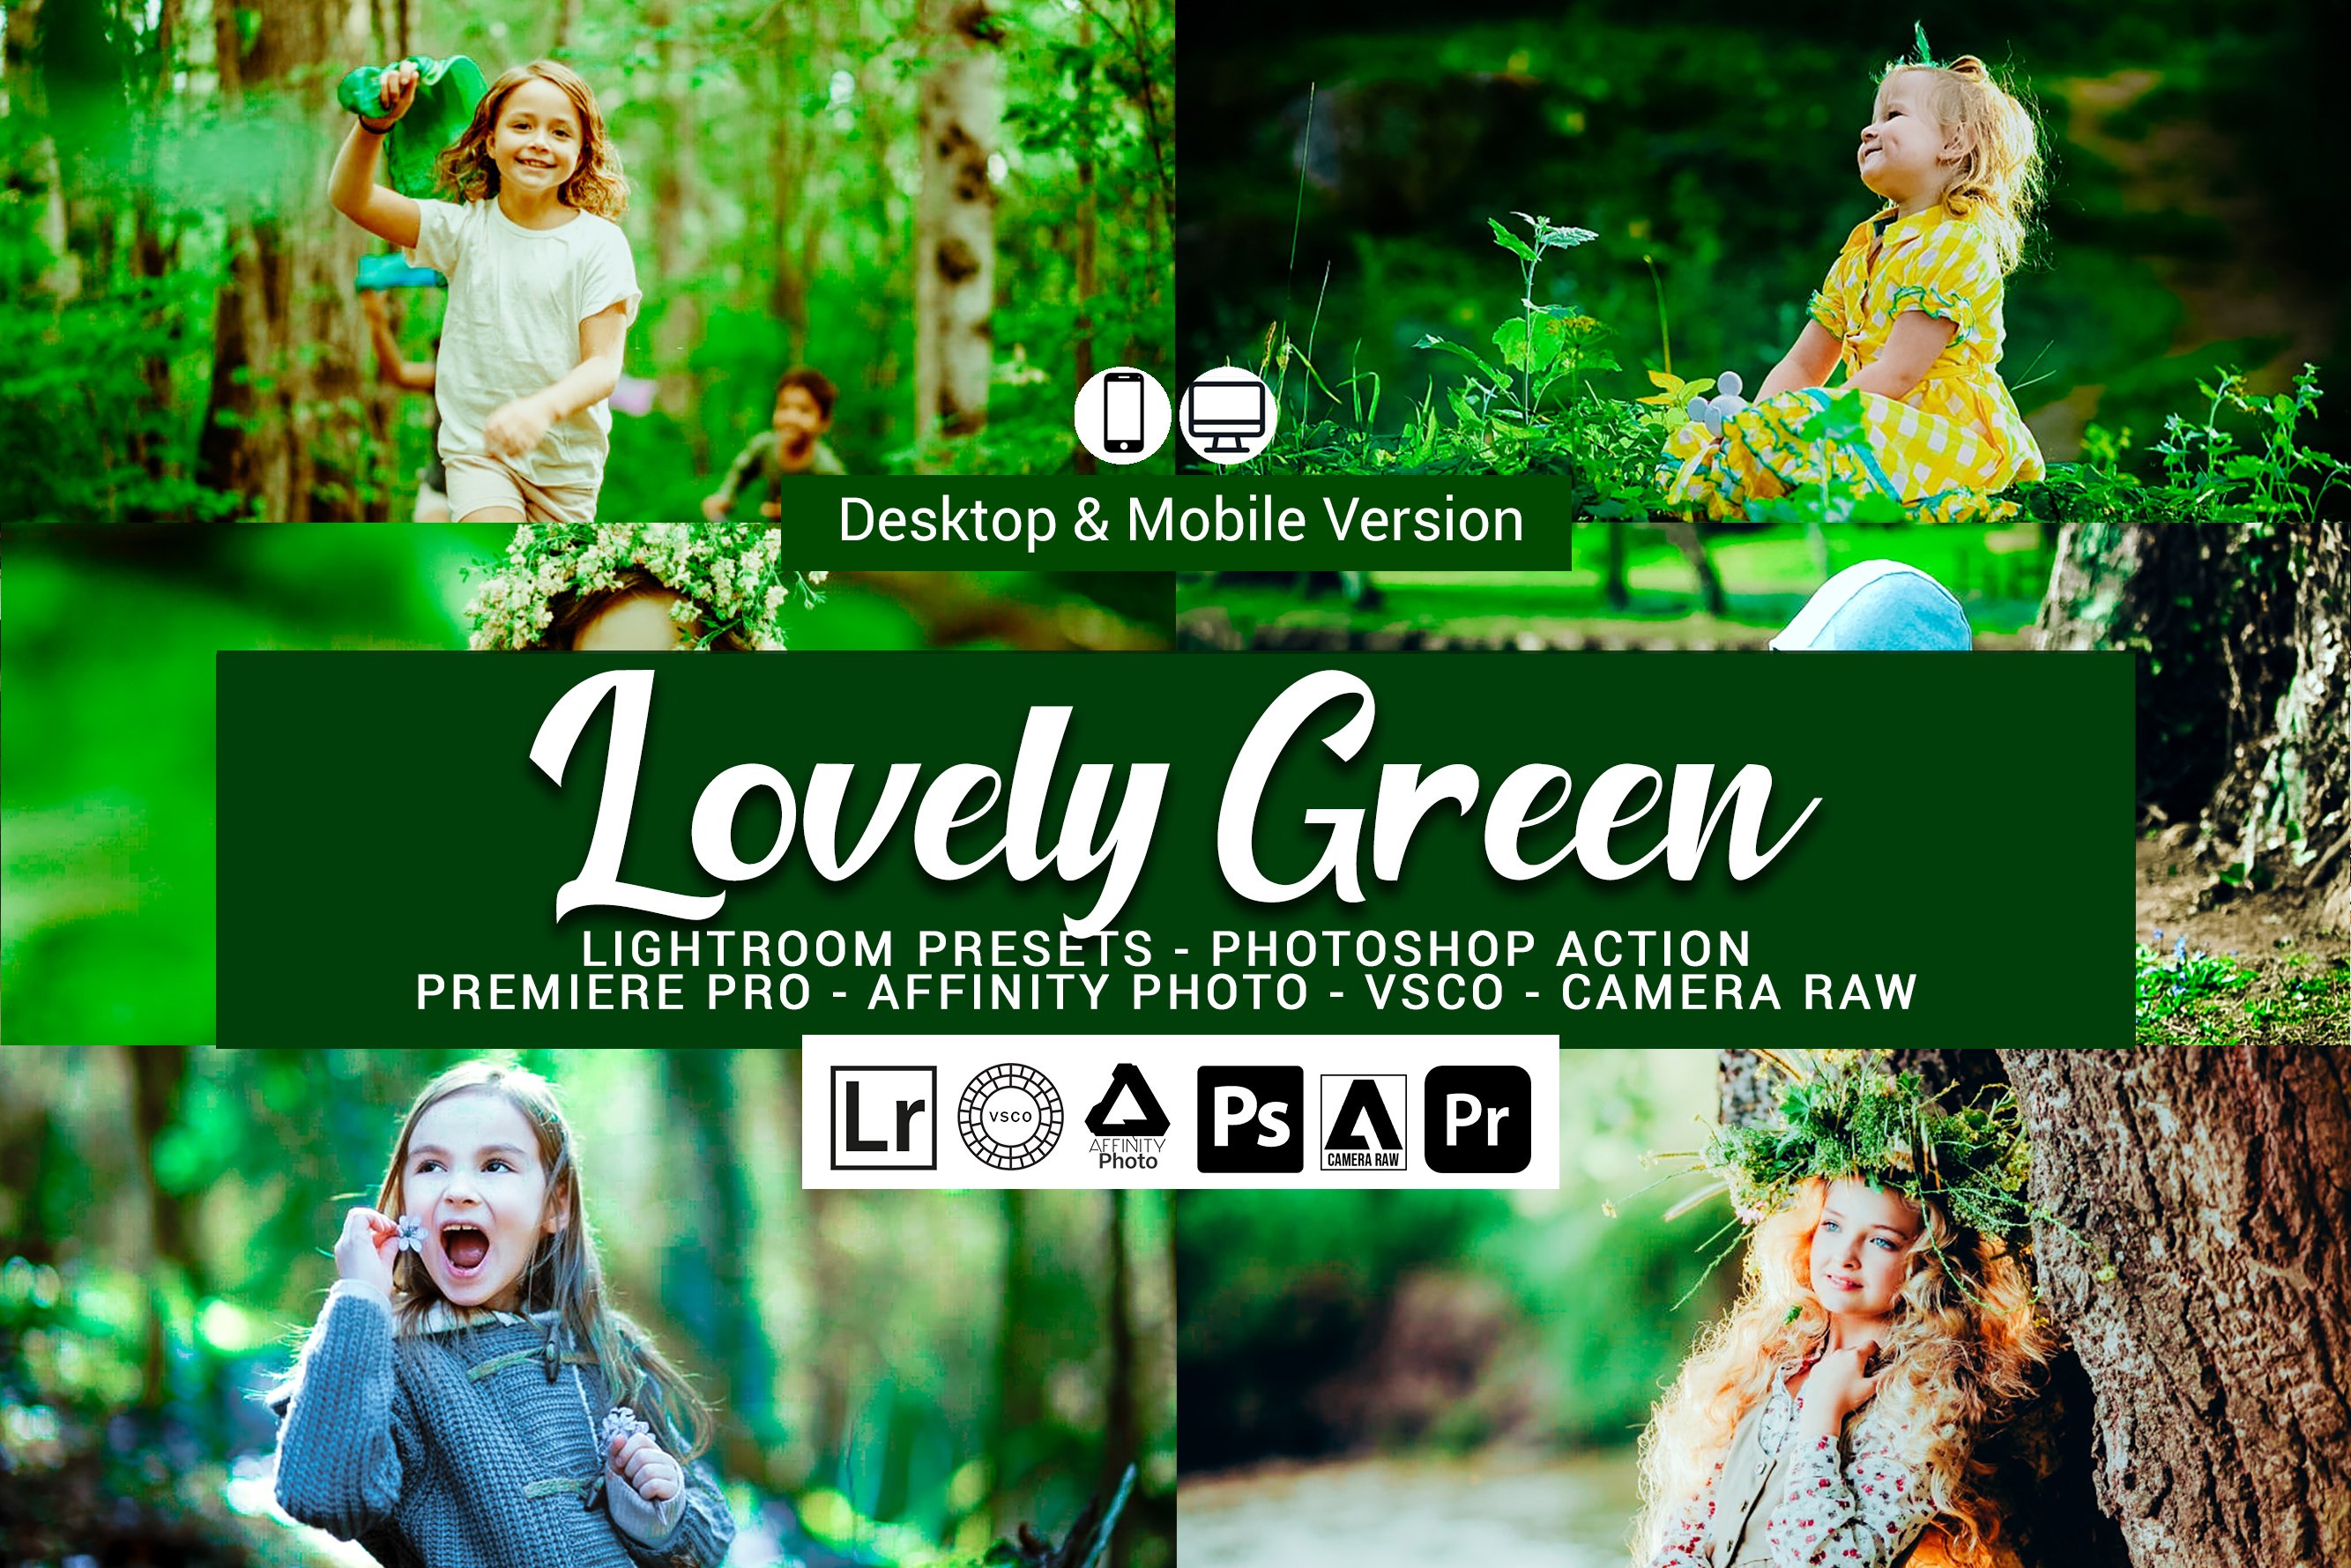 Lovely Green Presetscover image.